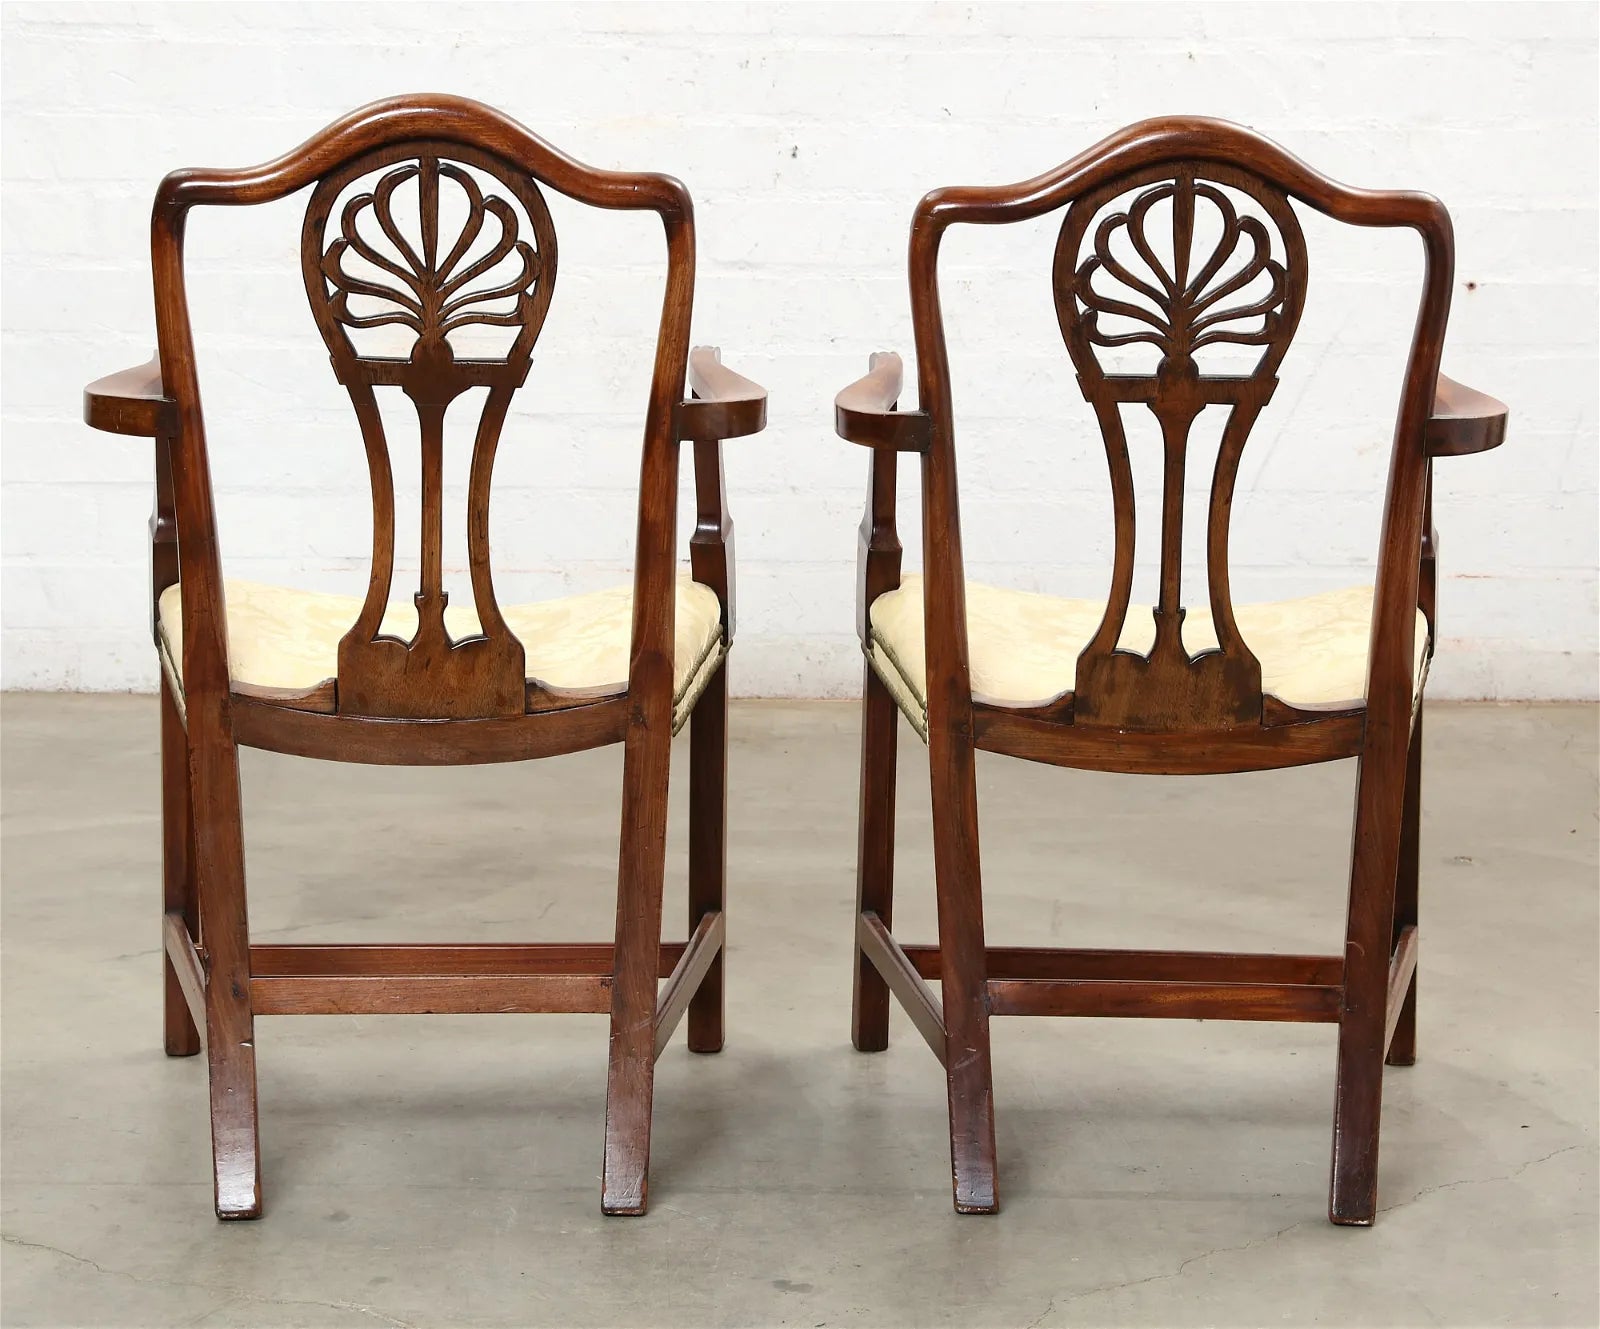 AF2-406: ANTIQUE PAIR OF LATE 18TH CENTURY ENGLISH GEORGE III CARVED MAHOGANY ARMCHAIRS